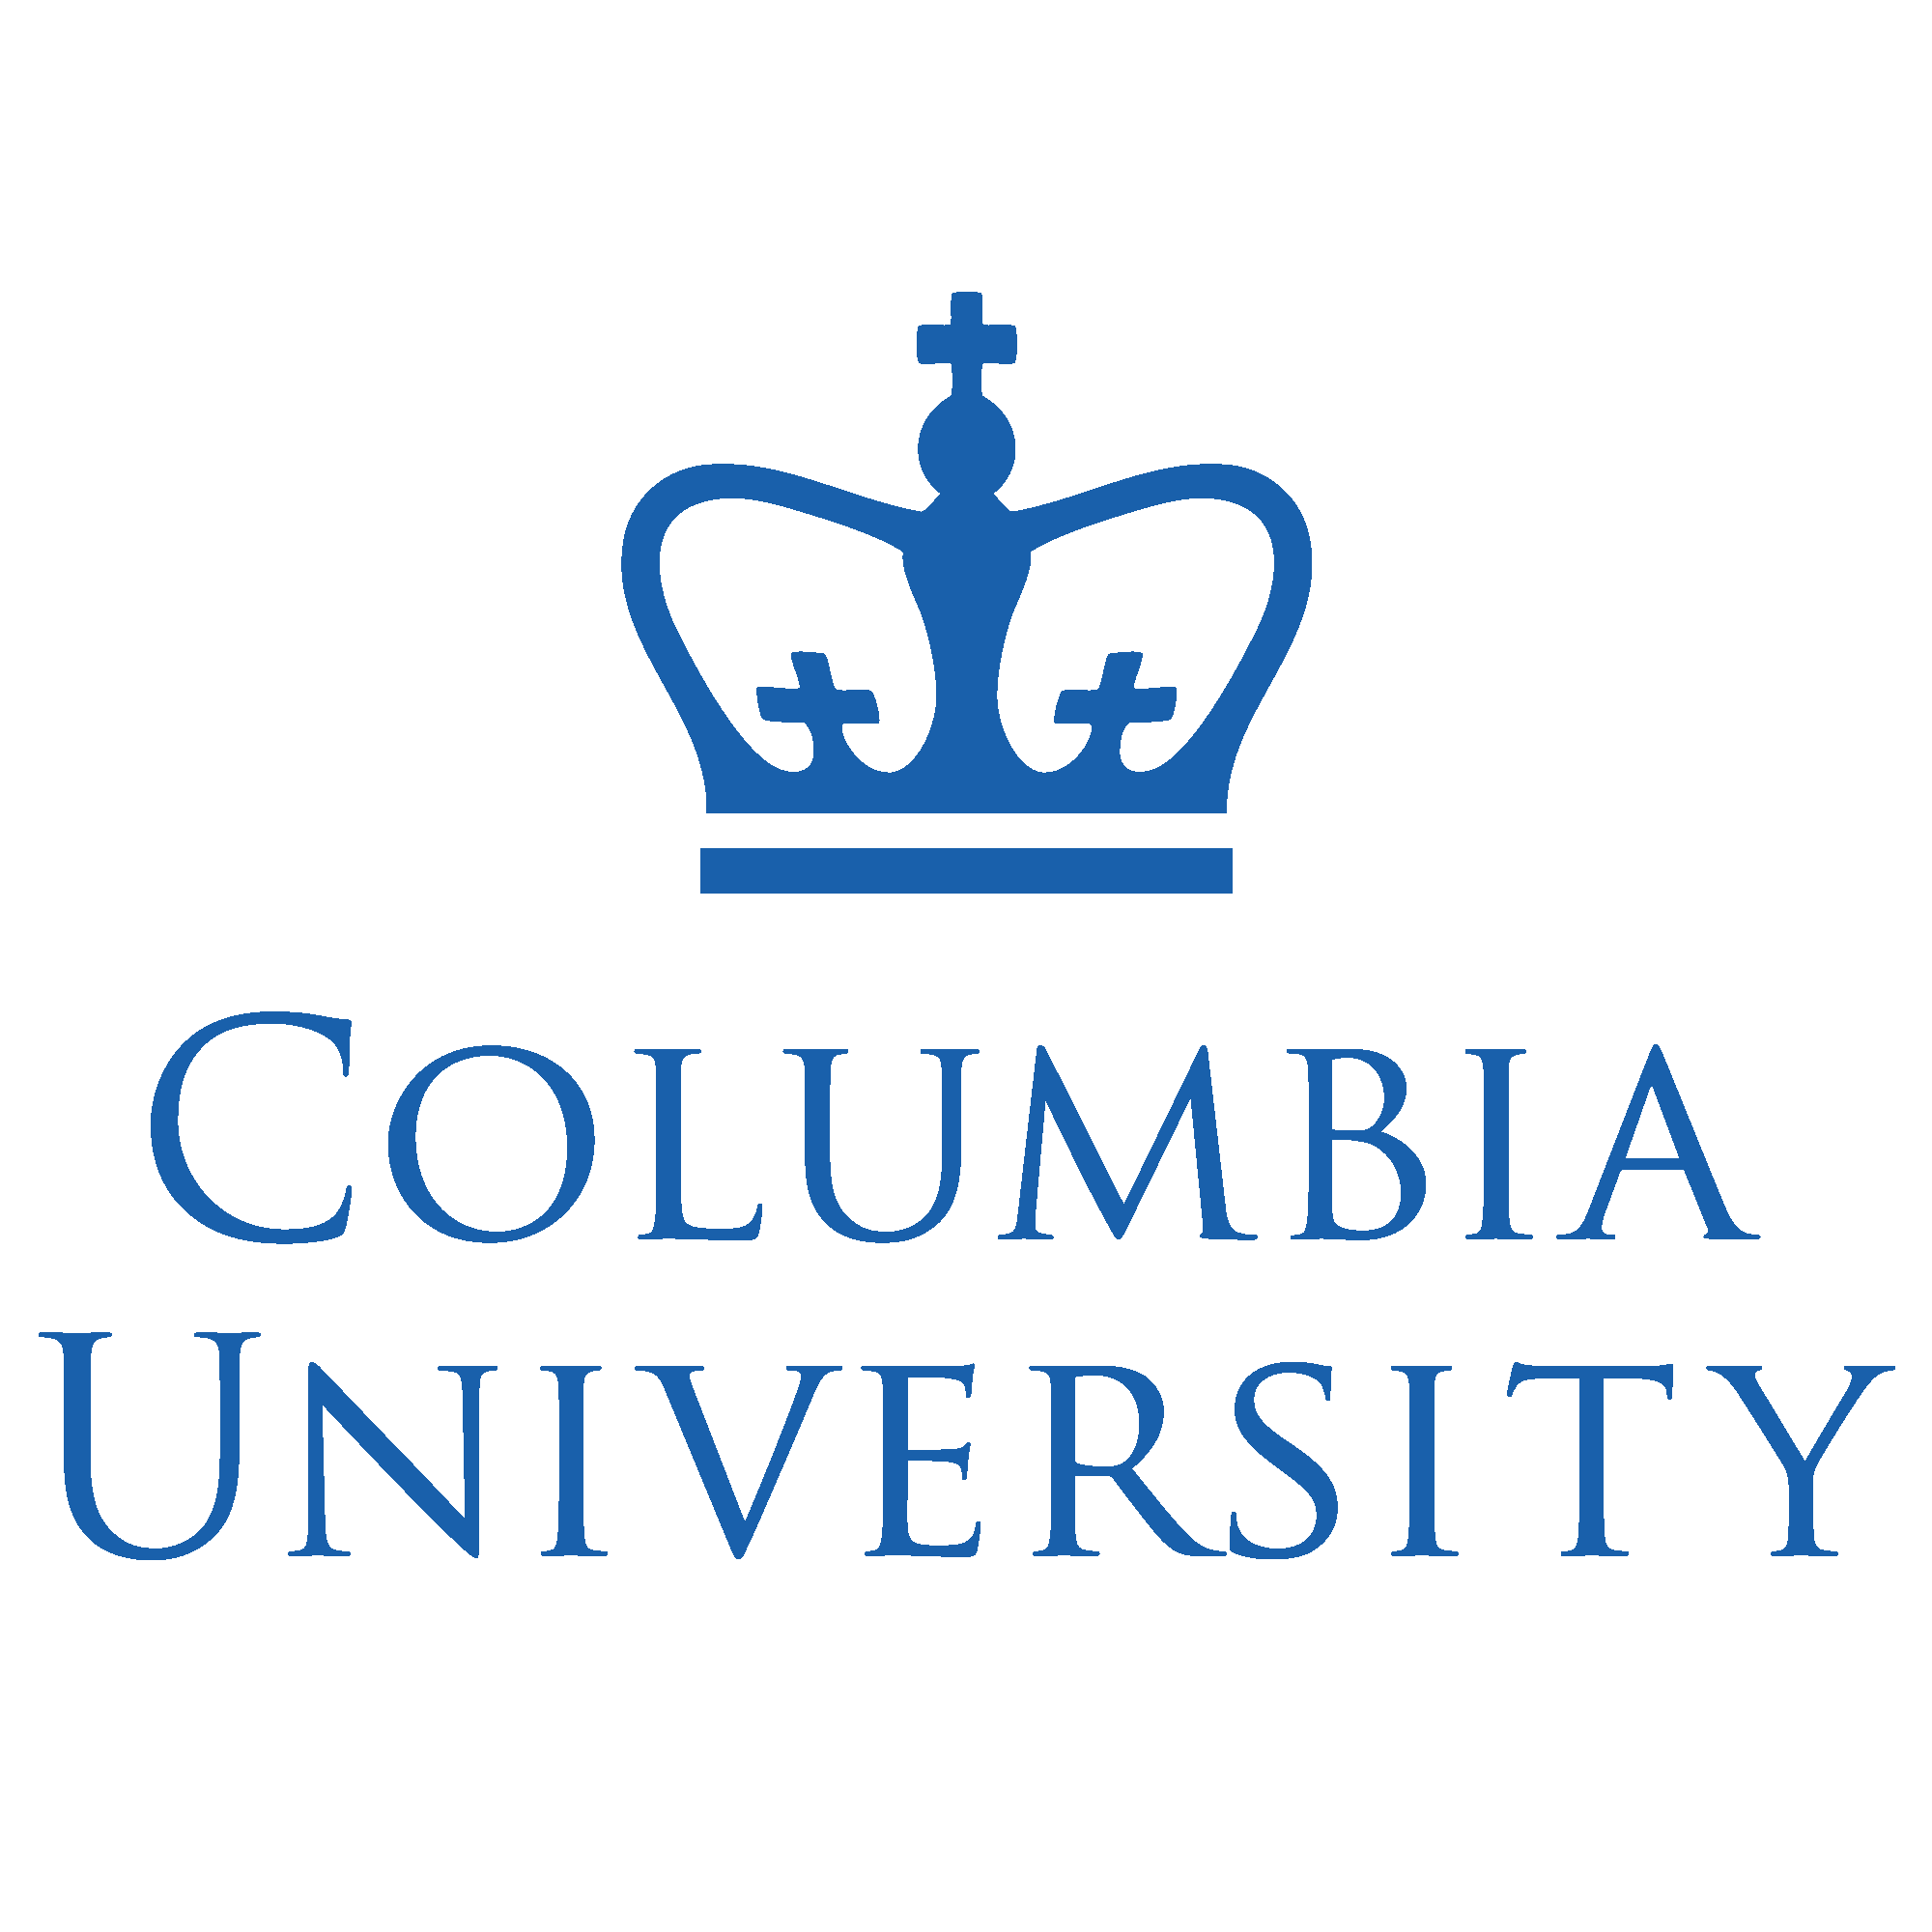 columbia.png